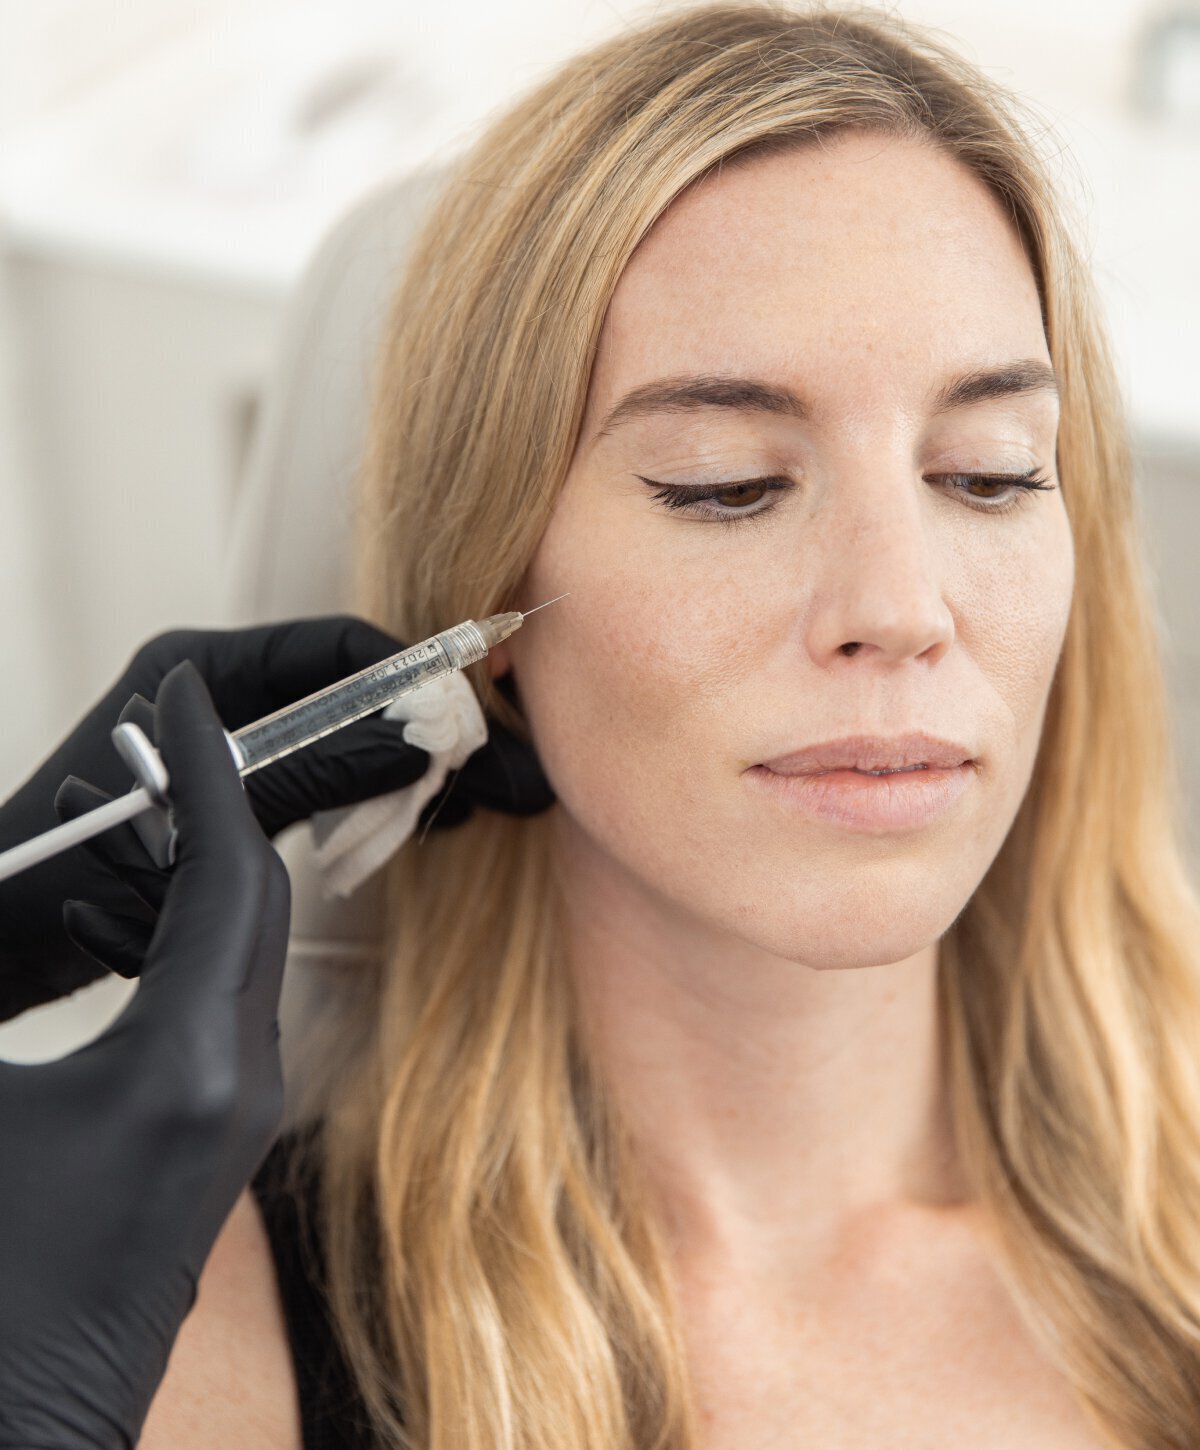 Are Dermal Fillers a Good Alternative to Facelifts?